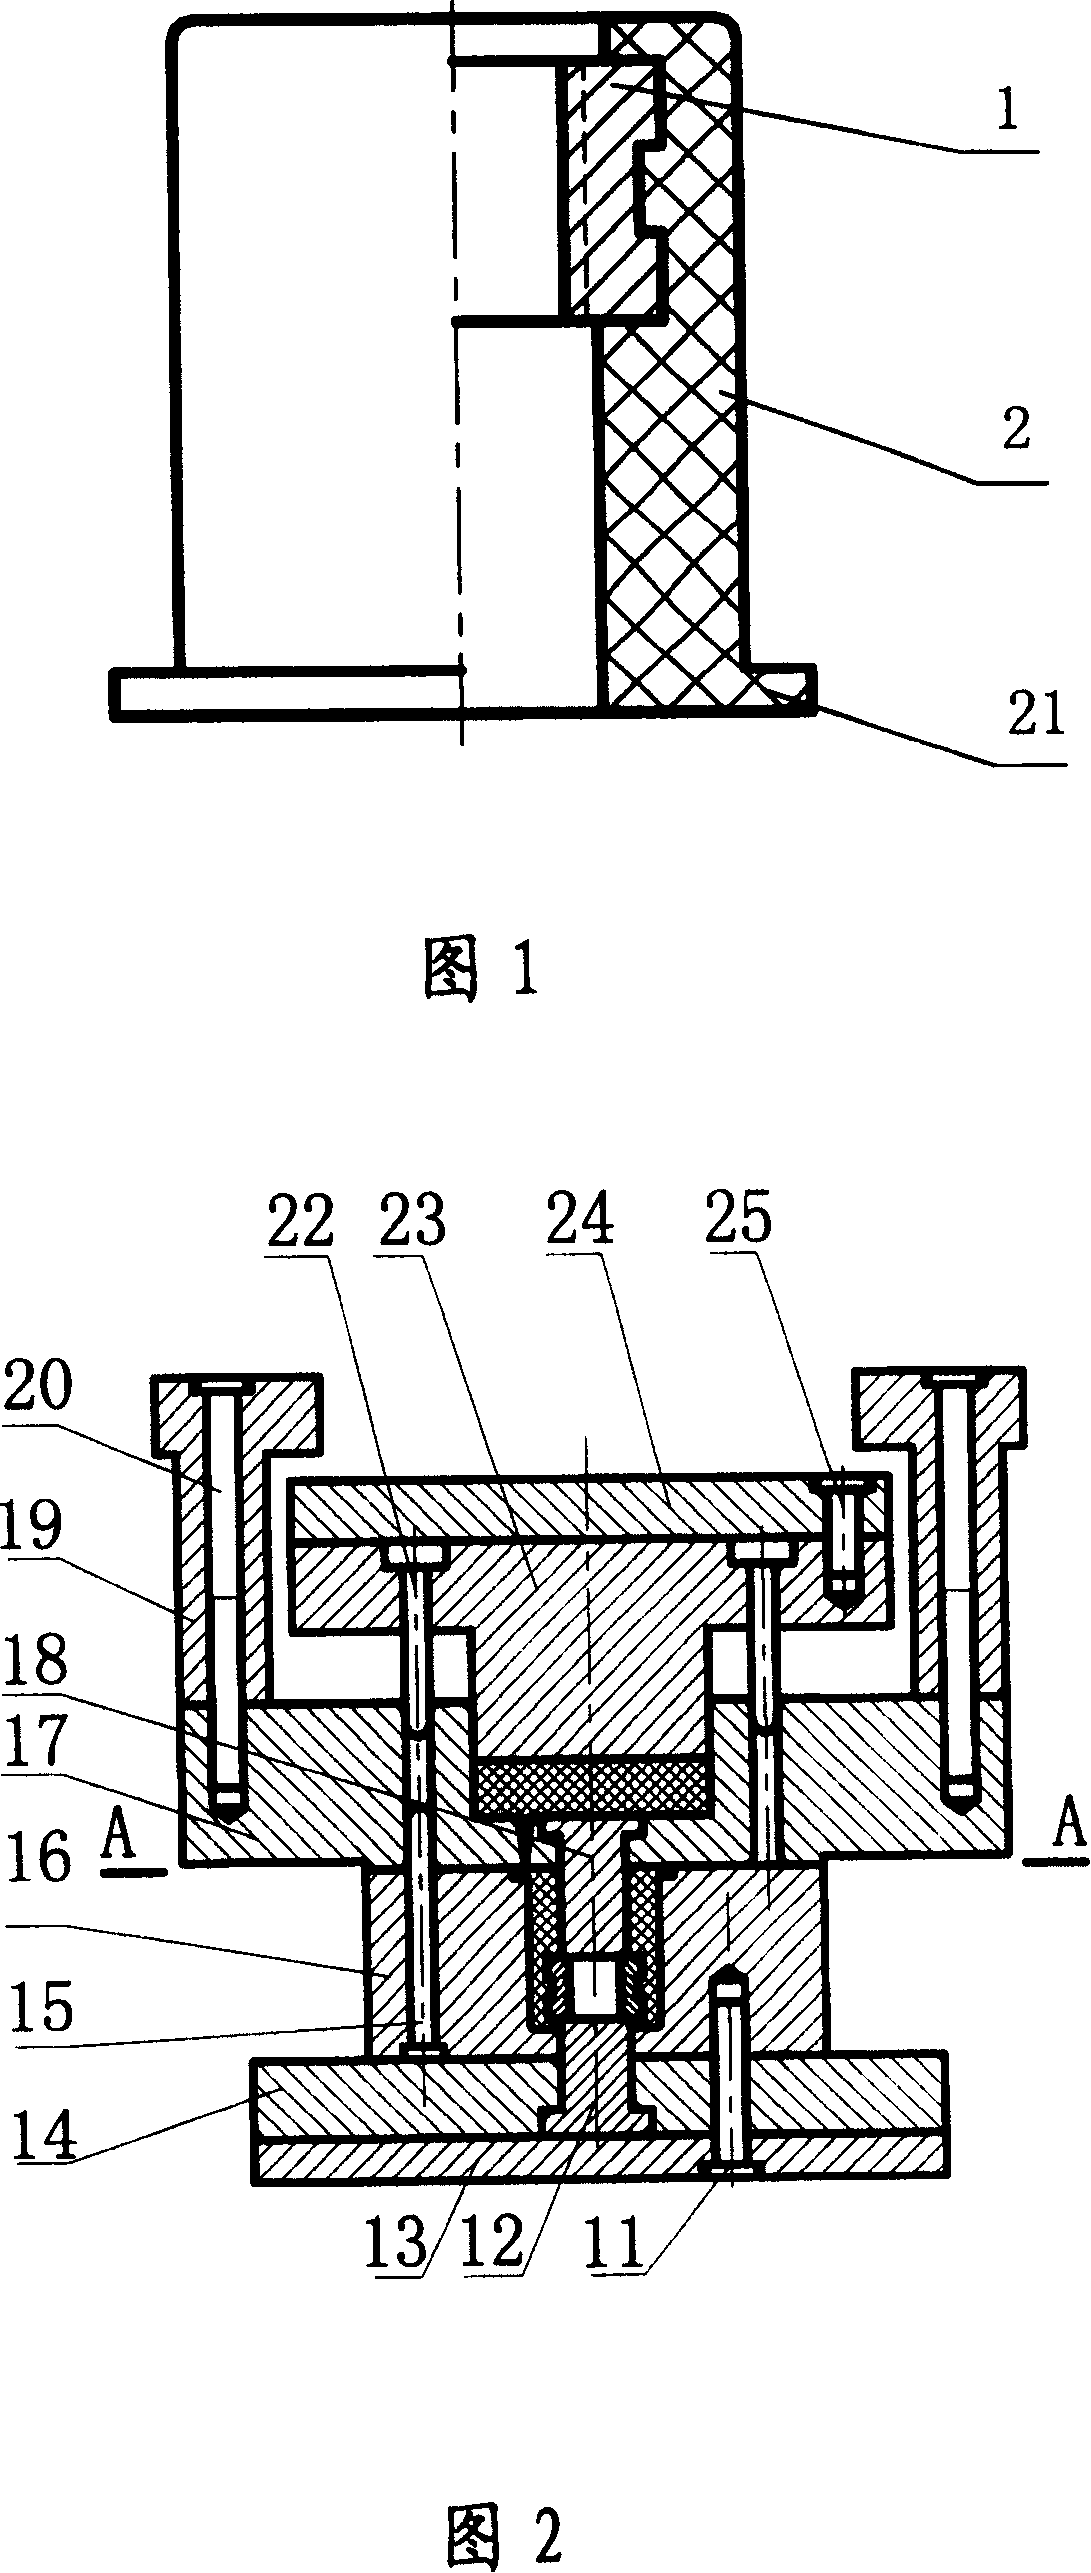 Processing method of rubber nut